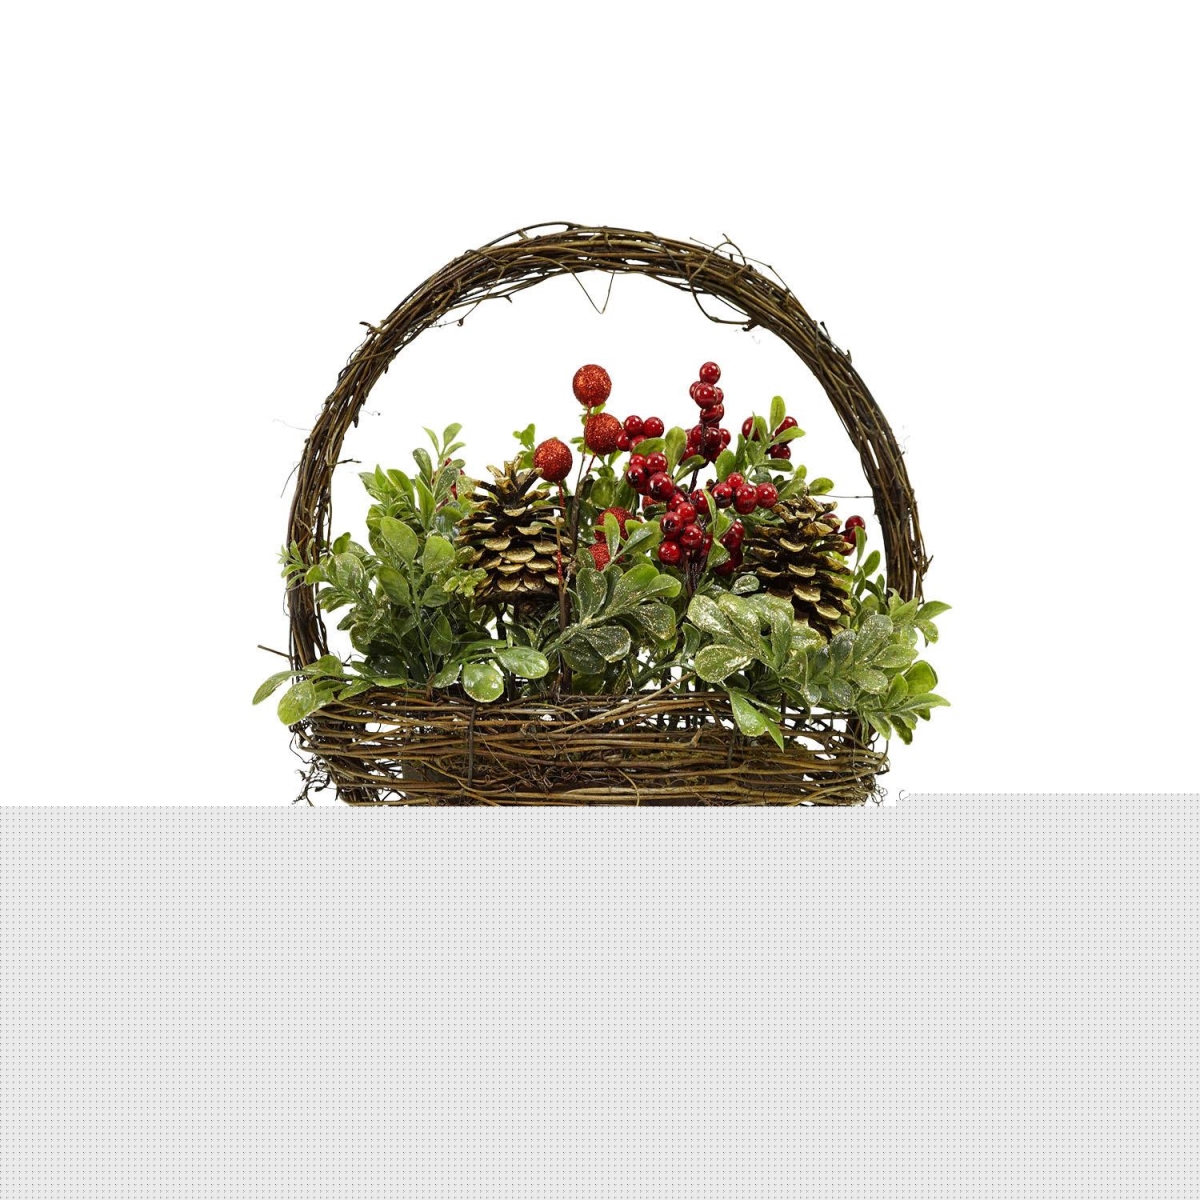 32275752 12 In. Pine Cones Berries & Boxwood In Twig Basket Christmas Tabletop Decoration